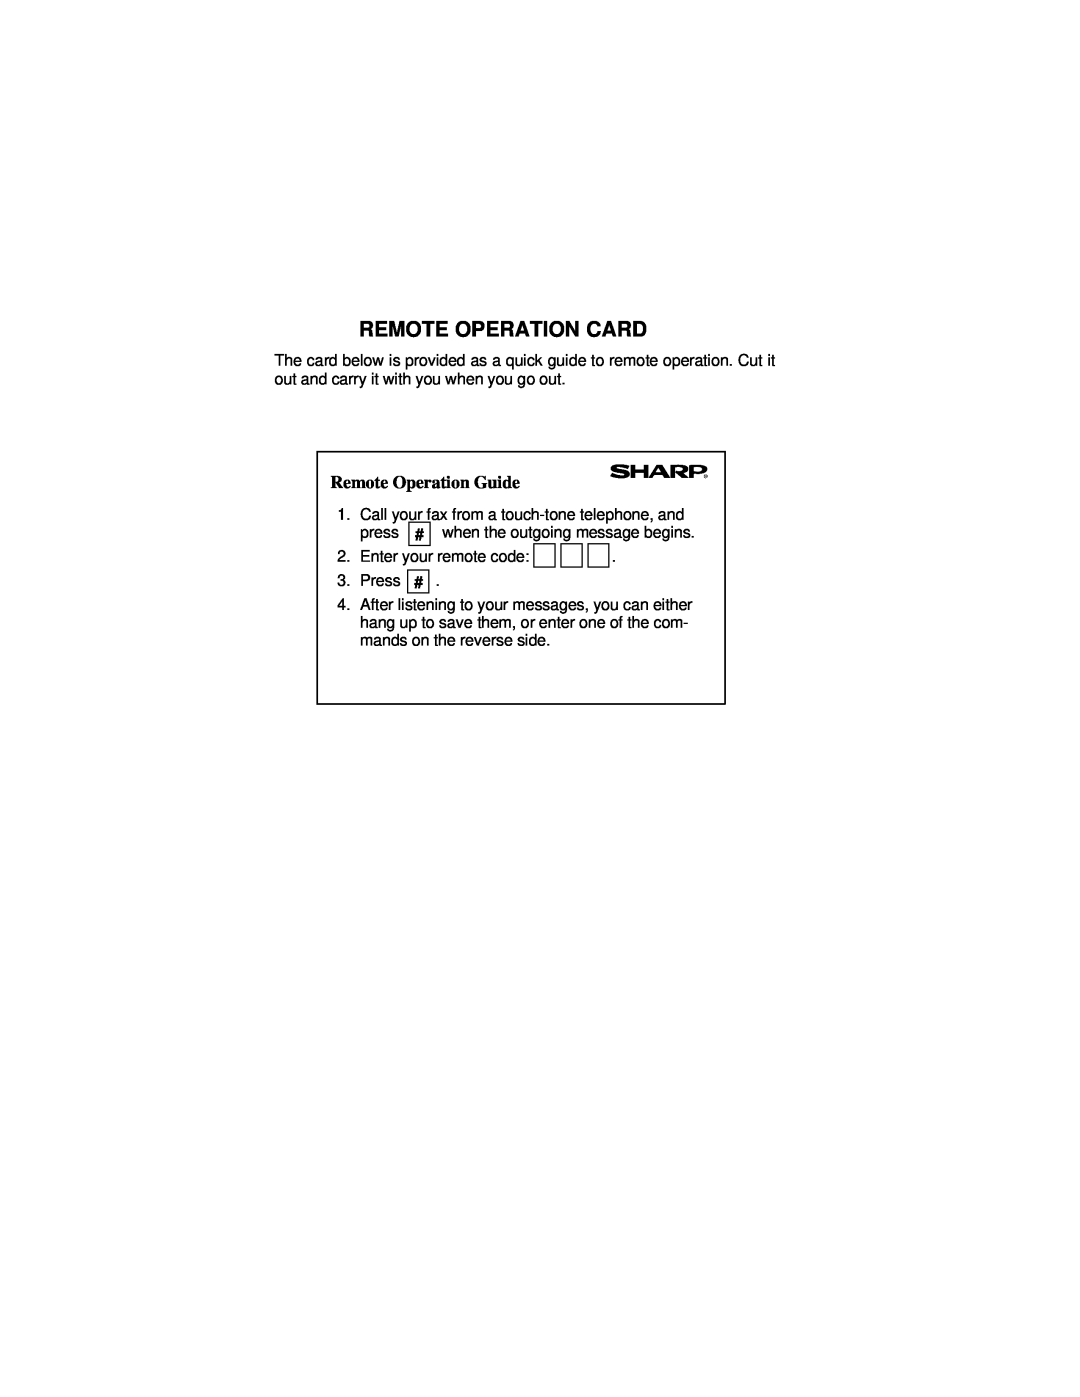 Sharp UX-460 operation manual Remote Operation Card, Remote Operation Guide 